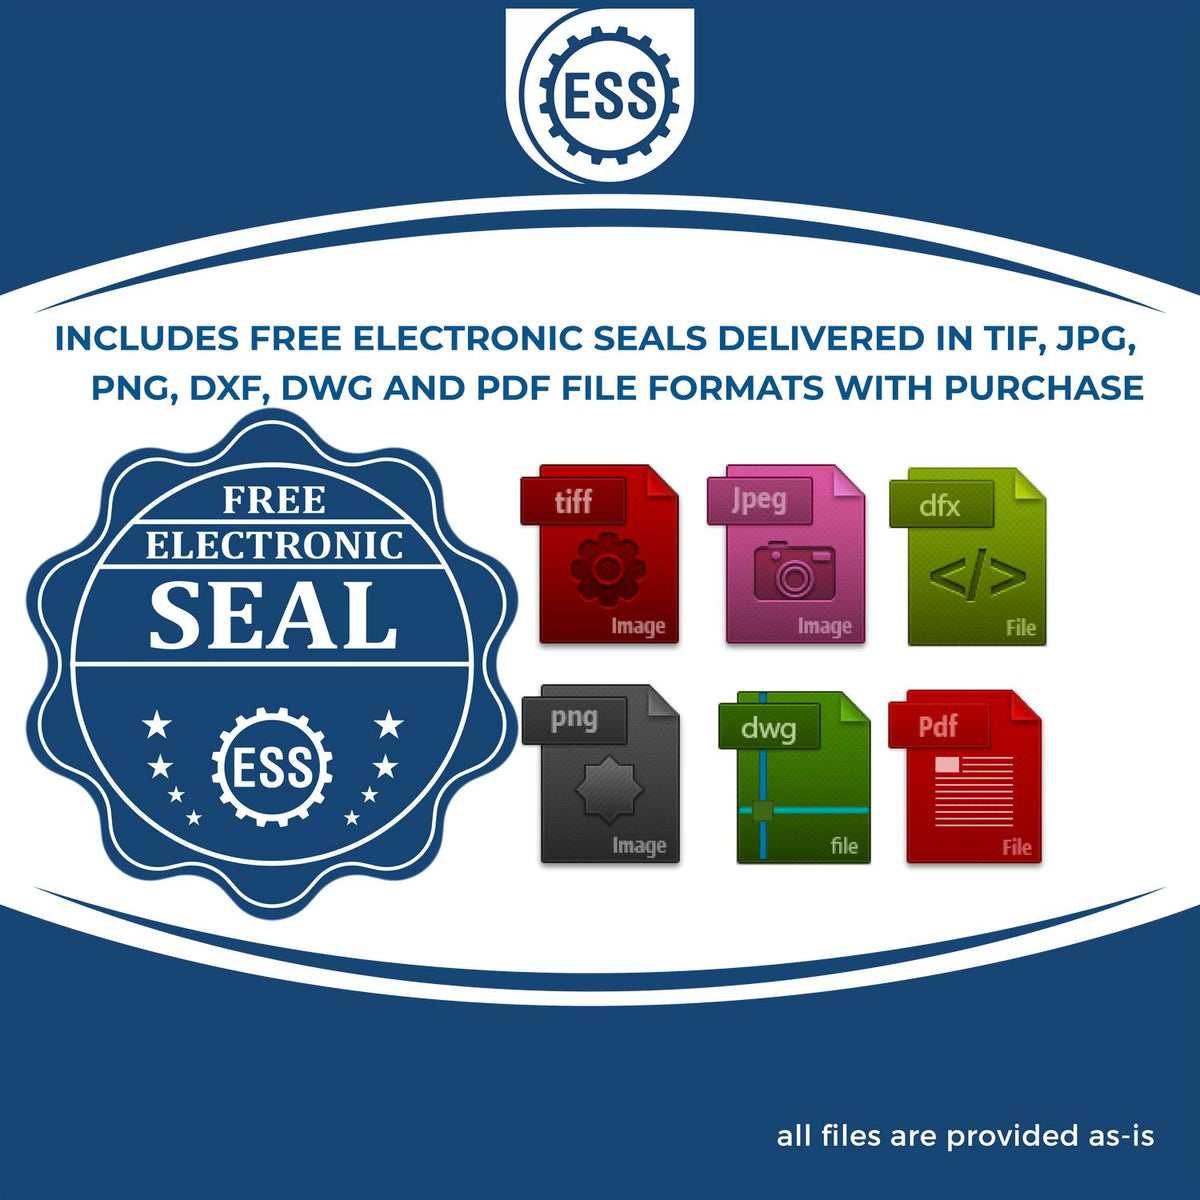 An infographic for the free electronic seal for the MaxLight Premium Pre-Inked Pennsylvania Rectangular Notarial Stamp illustrating the different file type icons such as DXF, DWG, TIF, JPG and PNG.